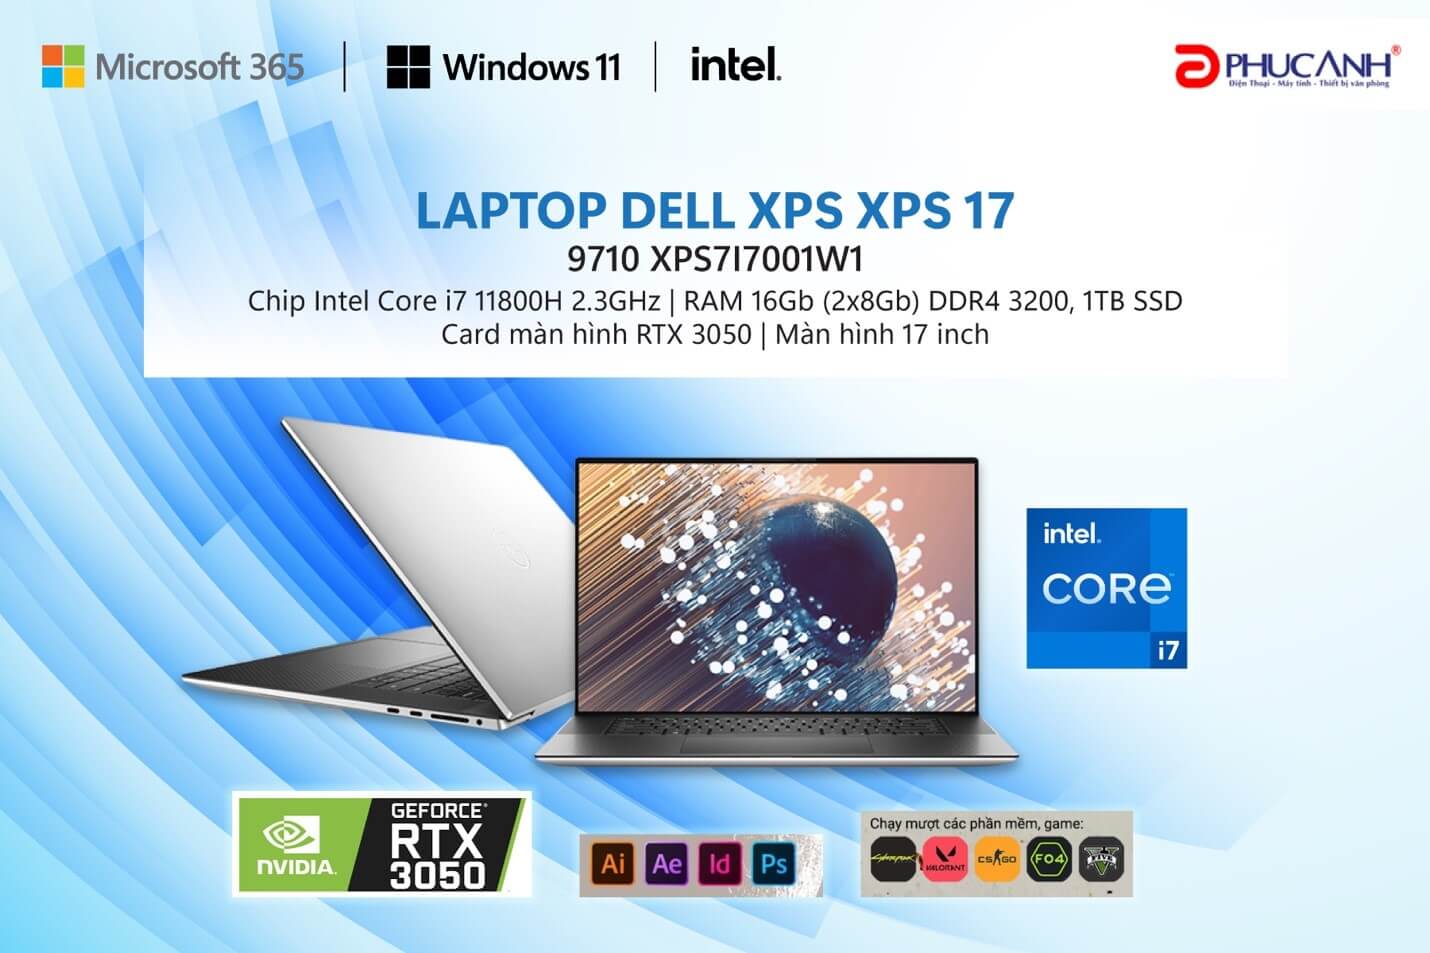 Laptop DELL XPS 17 9710 XPS7I7001W1